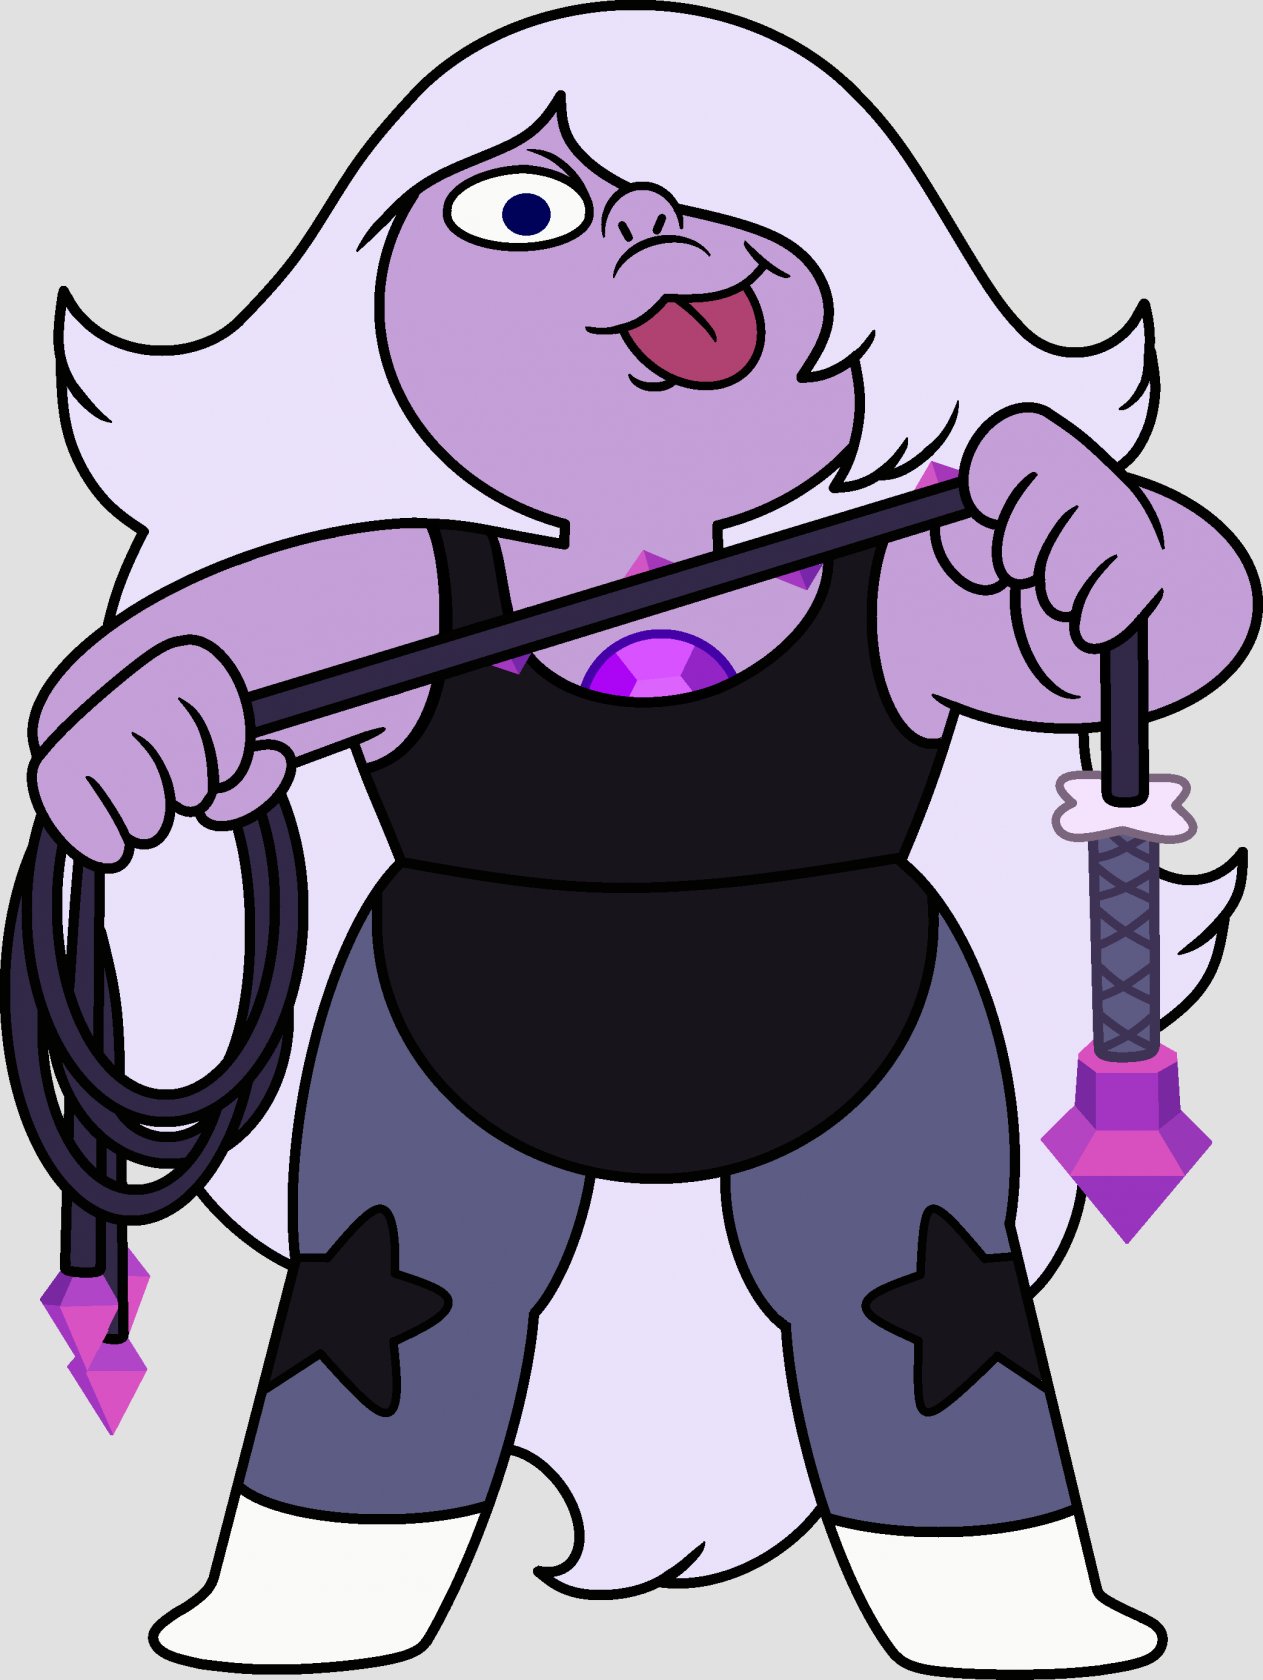 http://vignette4.wikia.nocookie.net/steven-universe/images/8/8a/Amethyst_new.png/revision/latest?cb=20150430231339